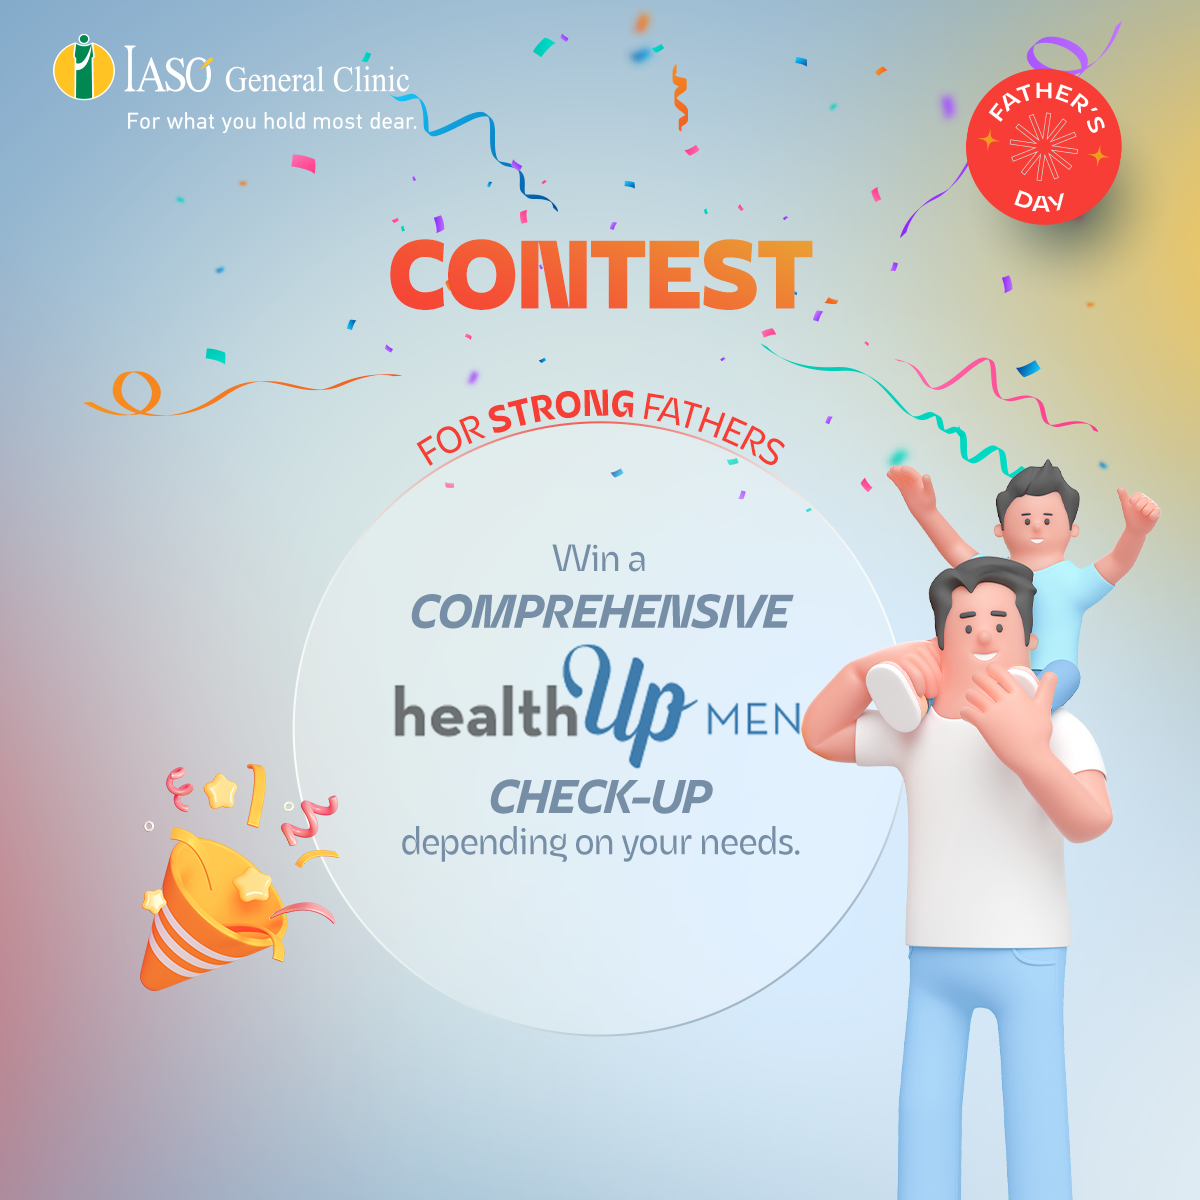 IASO General Clinic: Contest with 10 free healthUp check-up packages, for Father’s Day